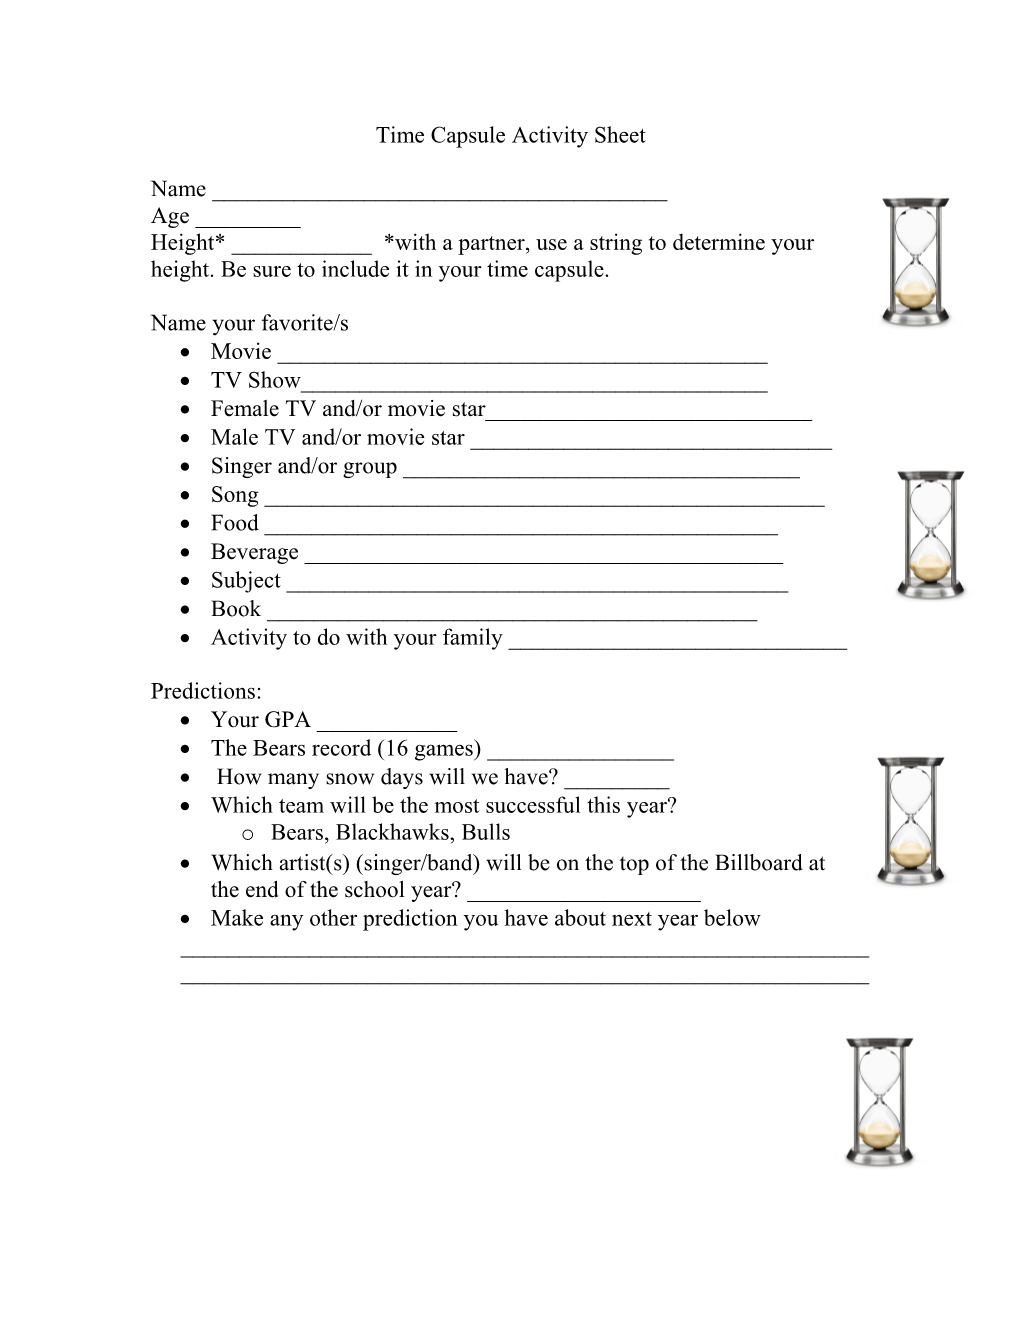 Time Capsule Activity Sheet